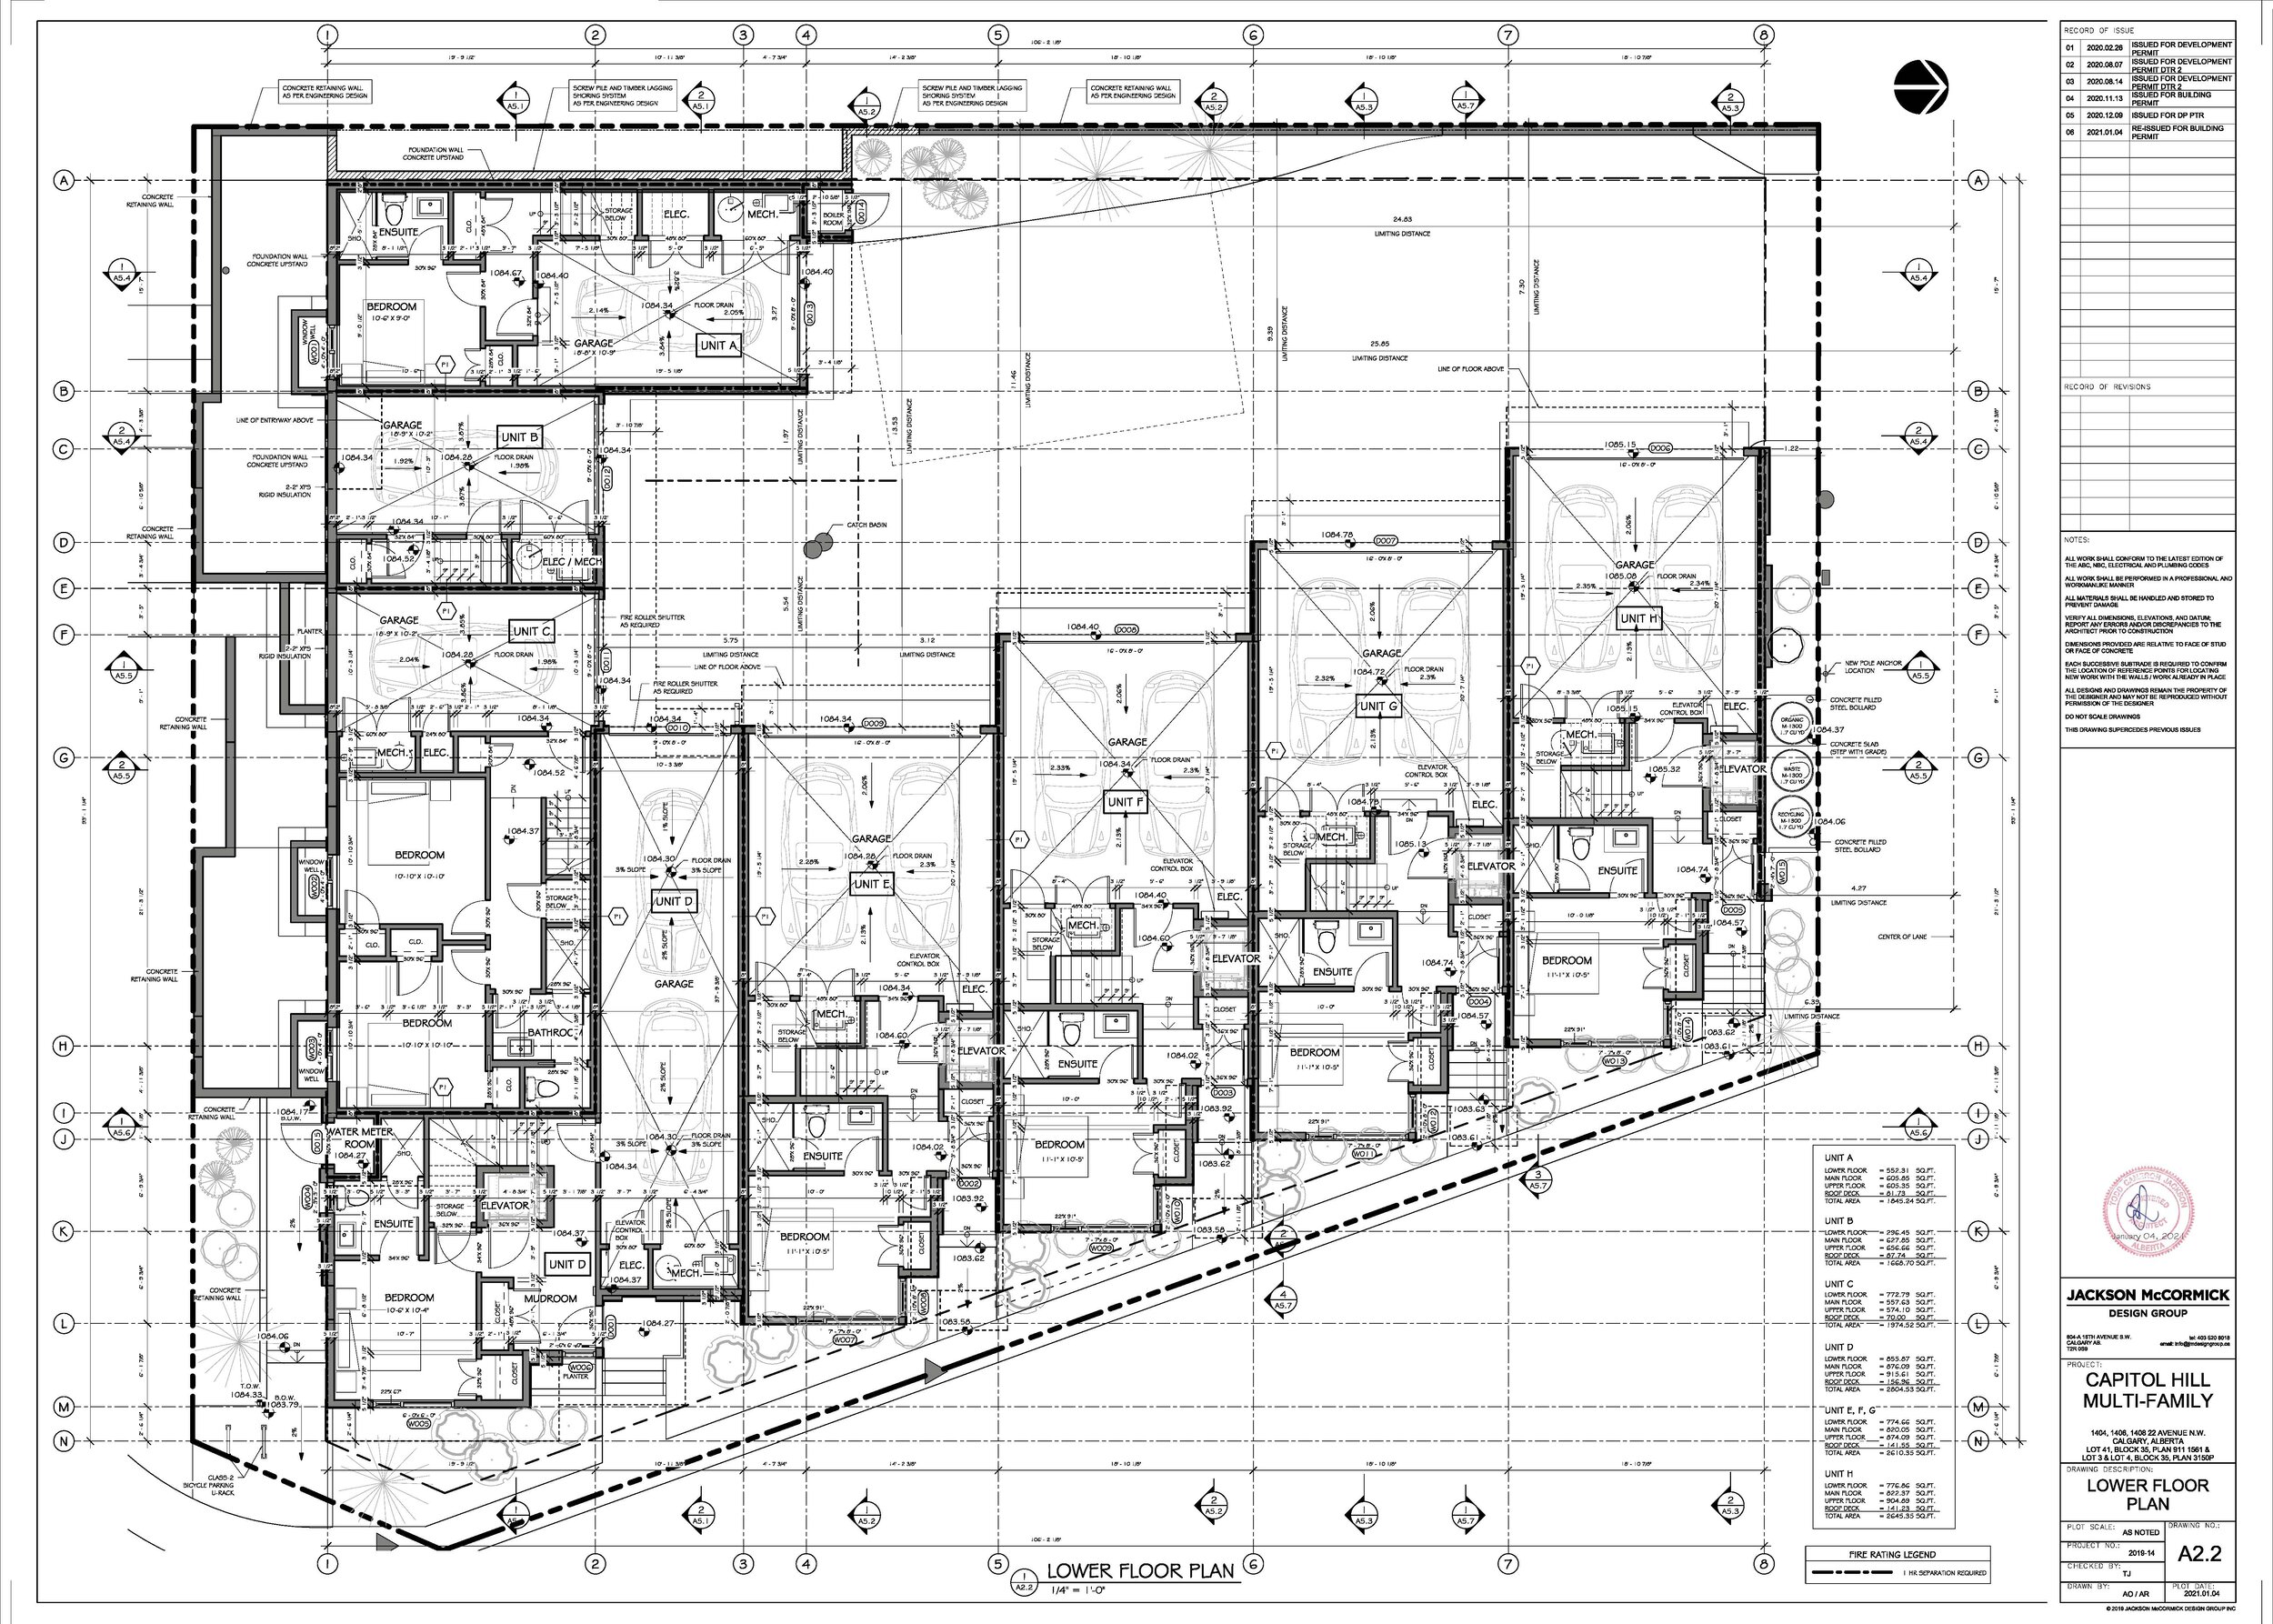 2021.01.04 - CAPITOL HILL MULTI-FAMILY - ARCH BP DRAWINGS_Page_08.jpg